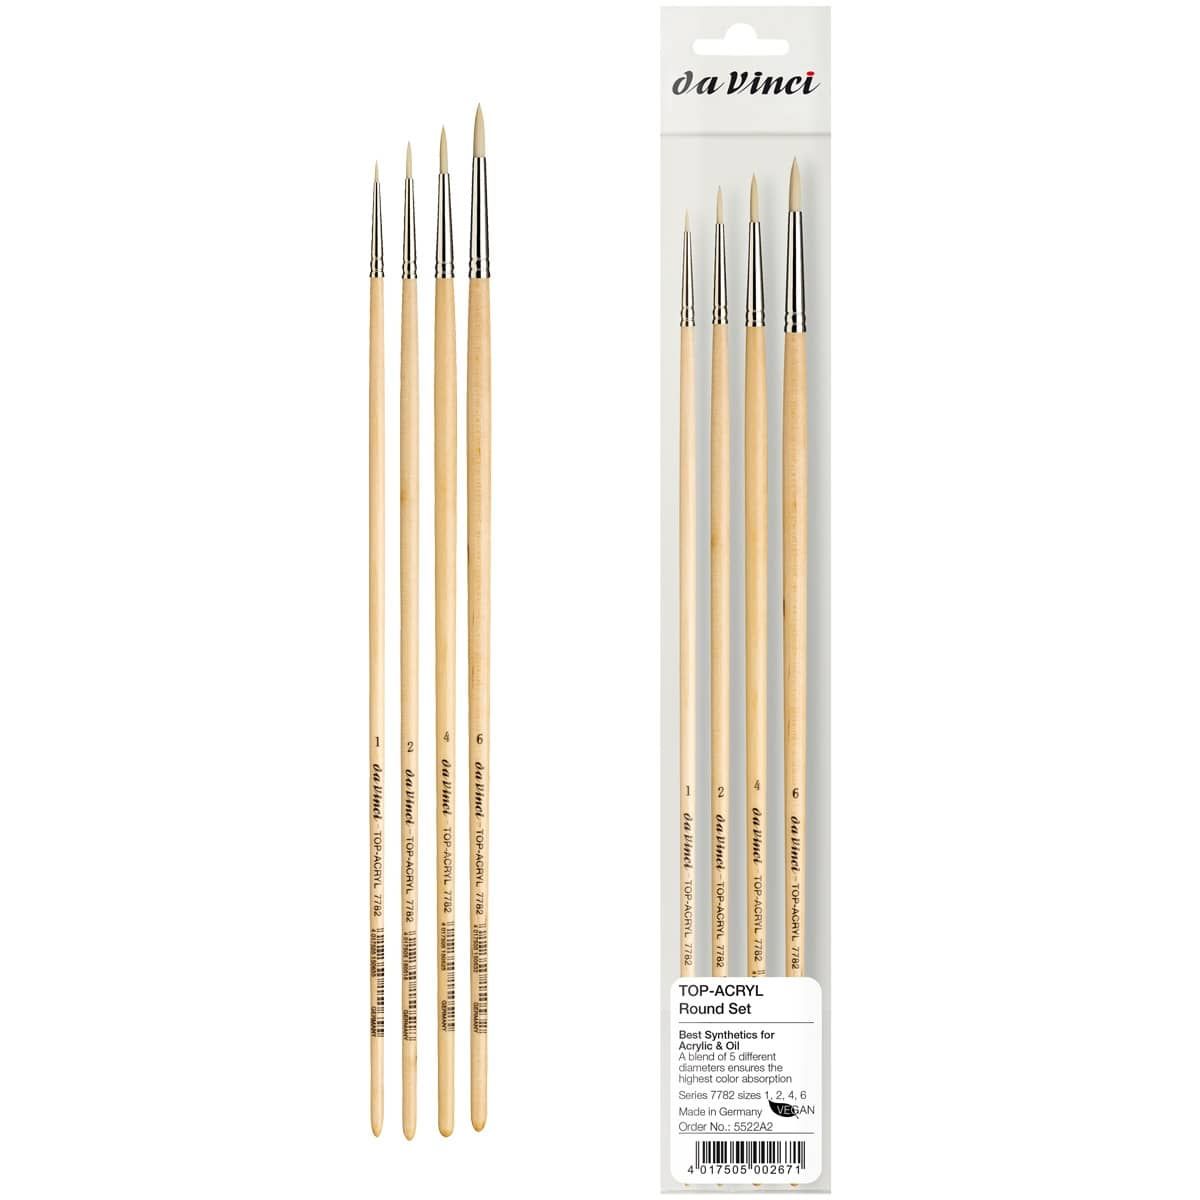 Da Vinci Top Acryl Long-Handle Synthetic Brushes - Round Set of 4